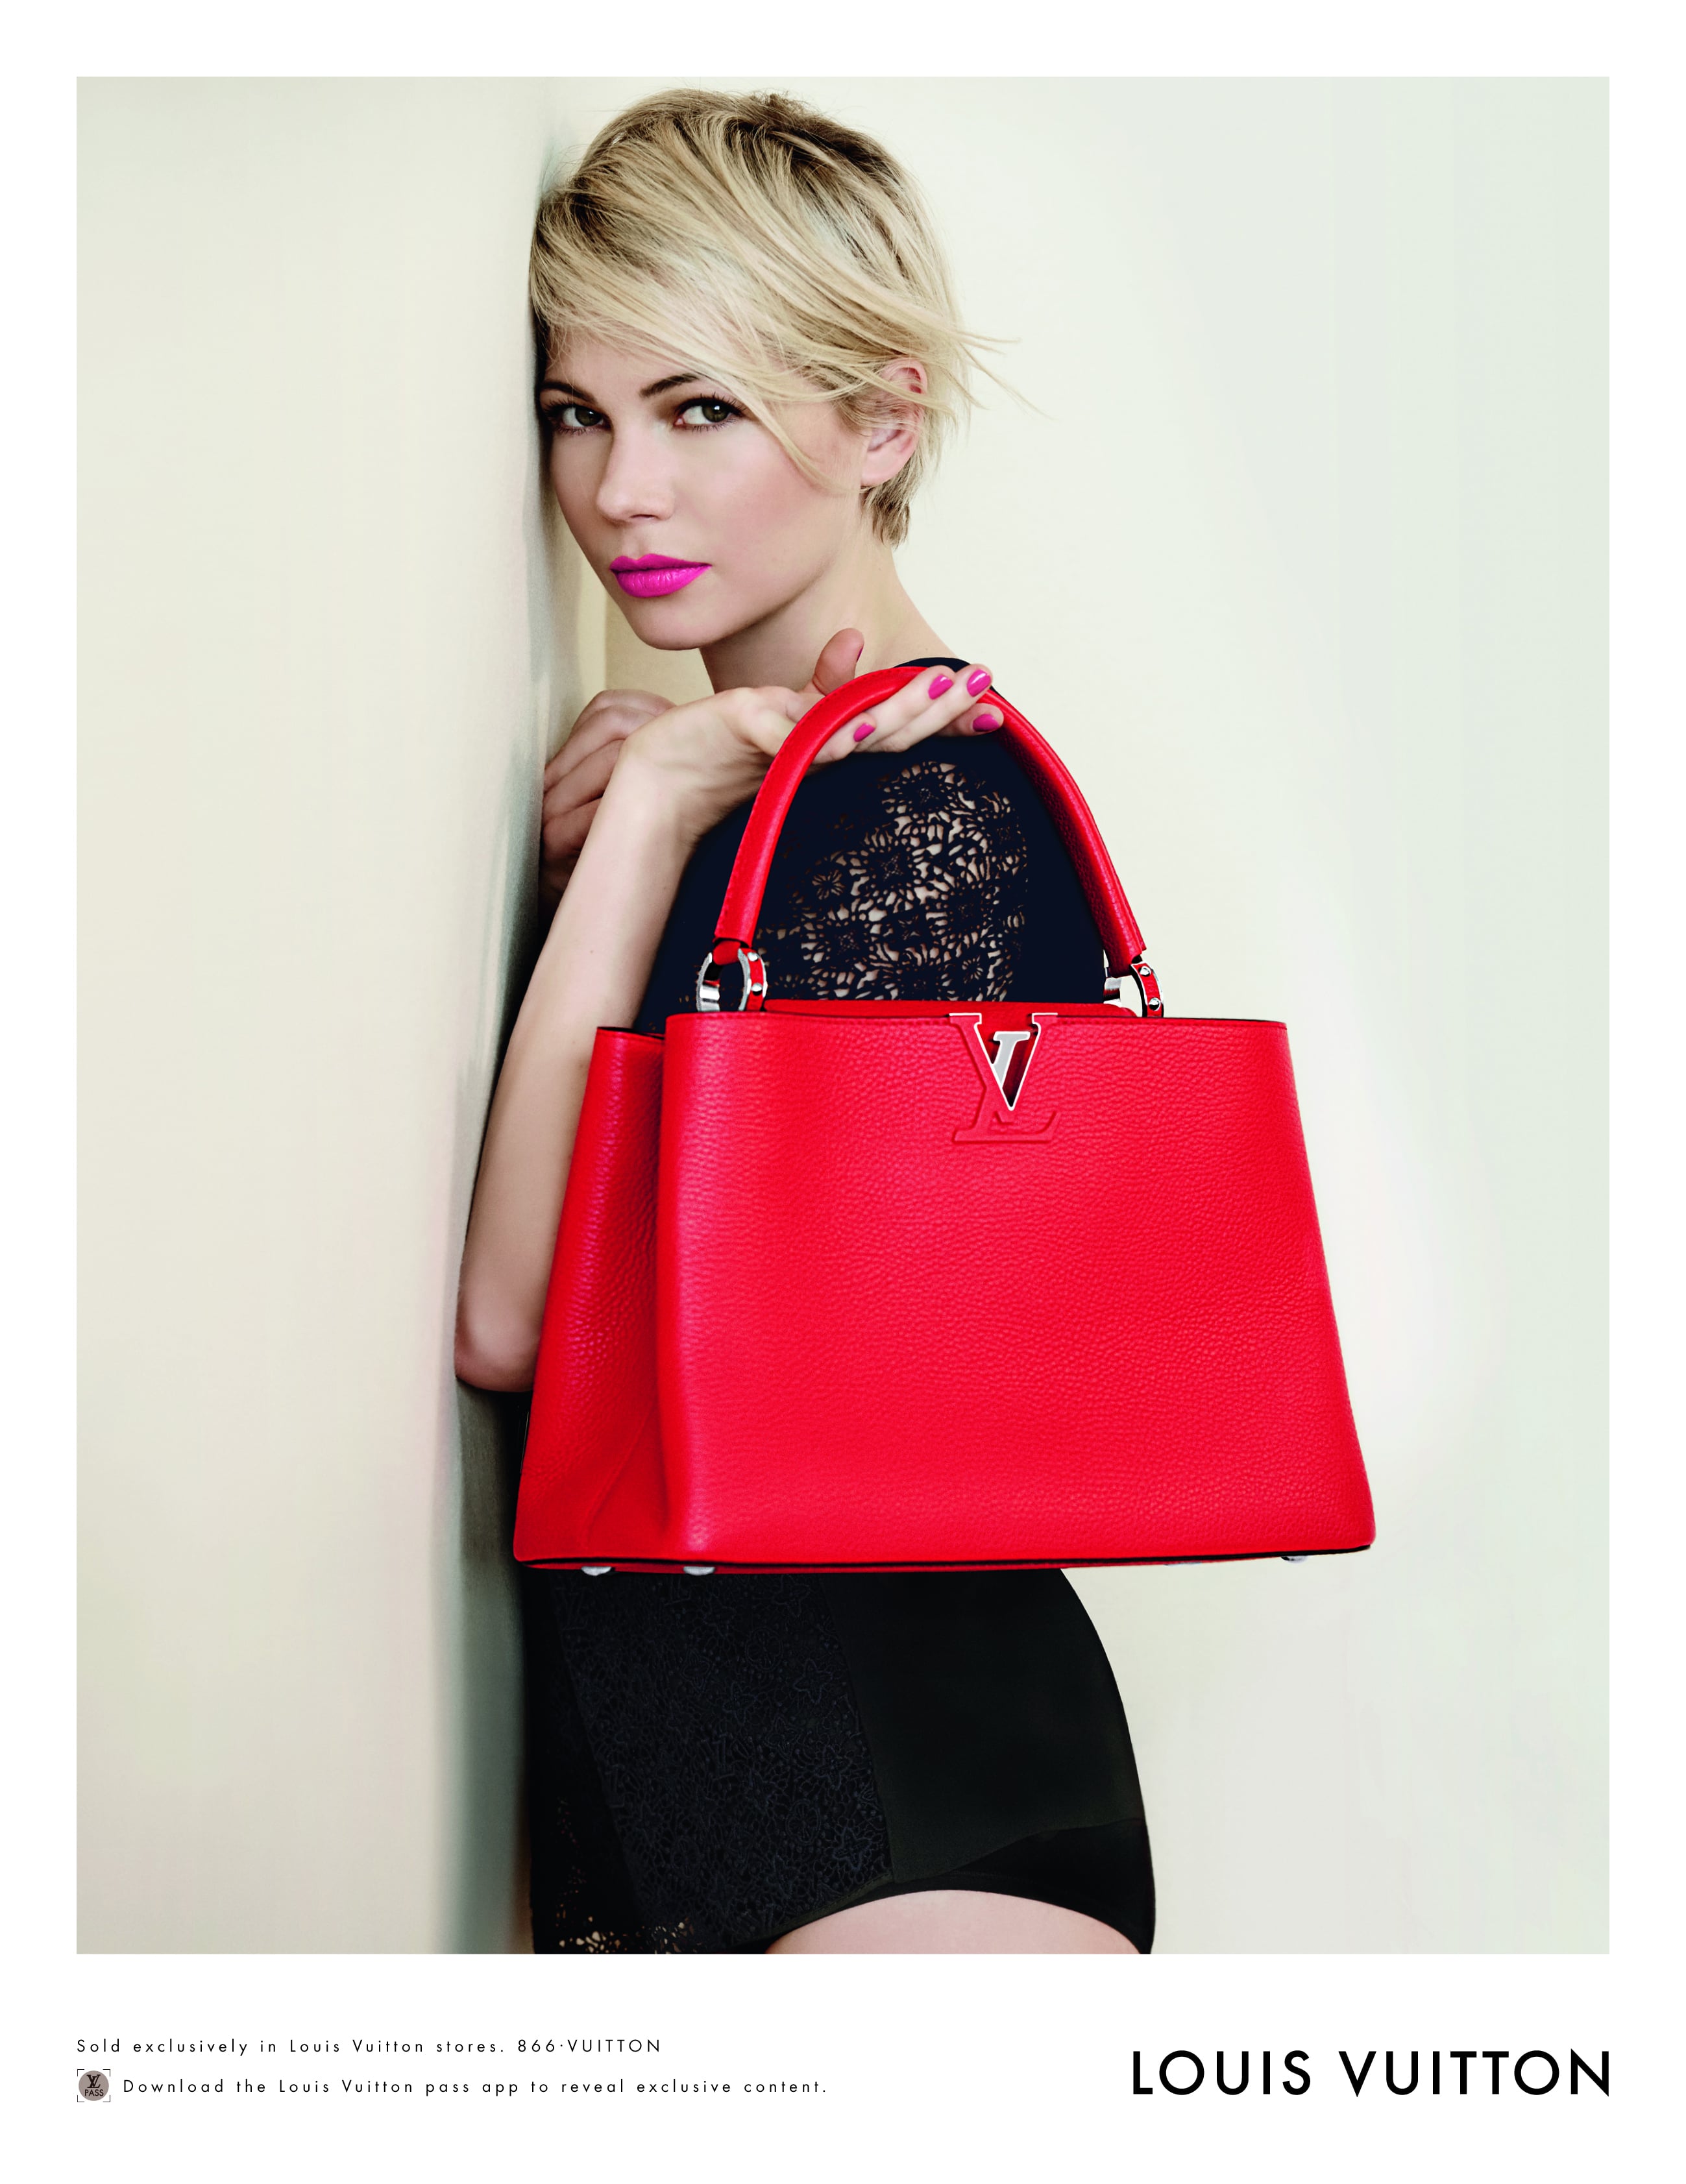 LOUIS VUITTON - Fashion - THE NEW LOCKIT INTRODUCED BY MICHELLE WILLIAMS